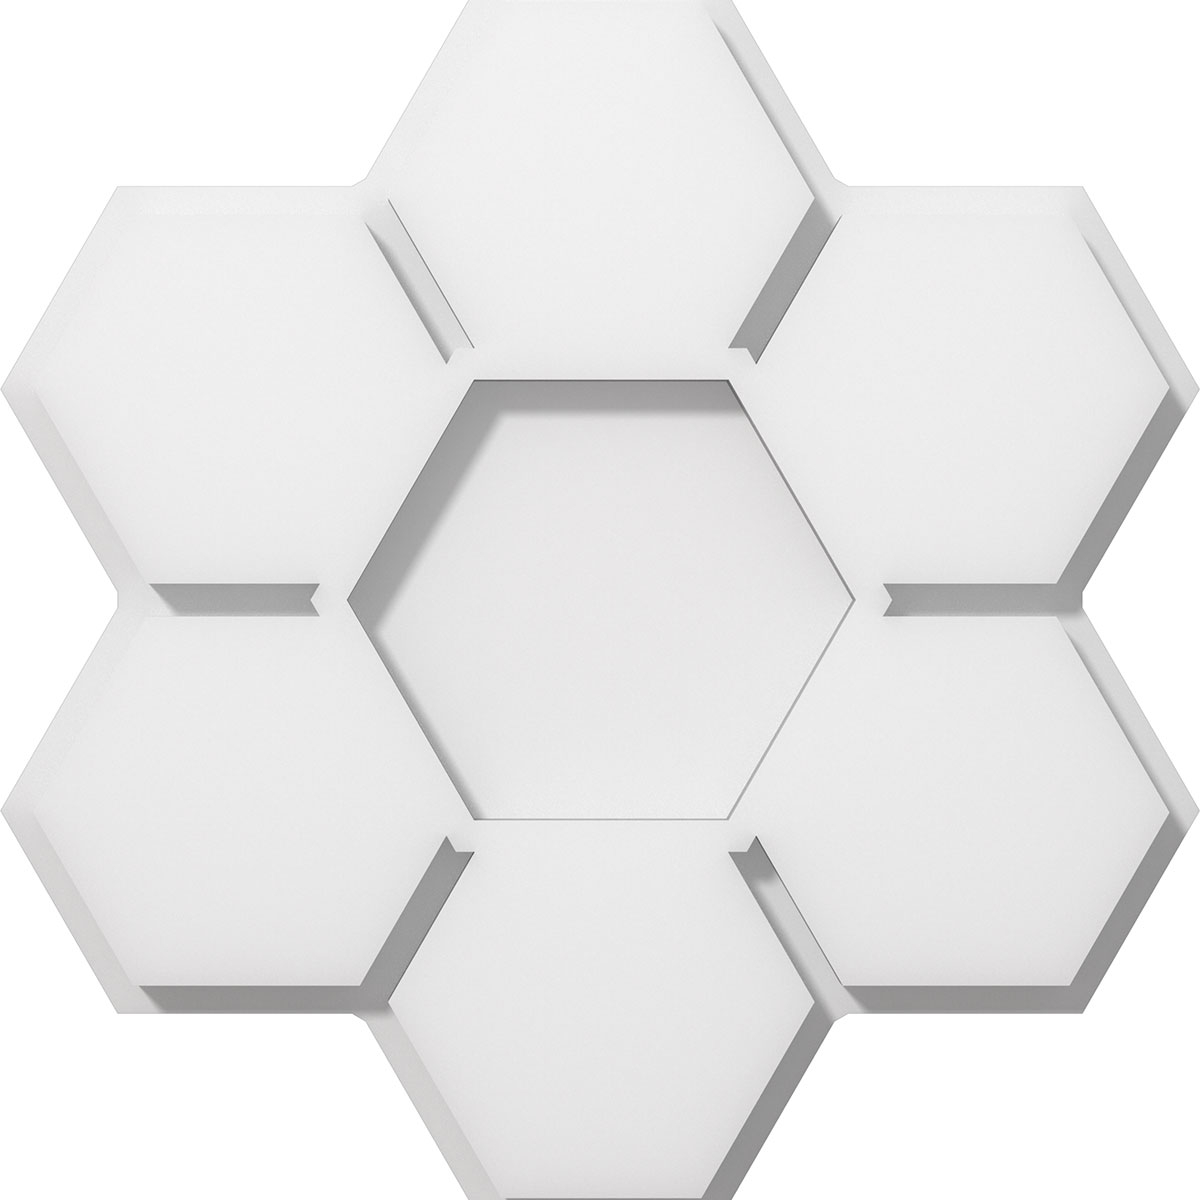 Cmp12dy 12 In. Od X 4 In. Square Daisy Architectural Grade Pvc Contemporary Ceiling Medallion